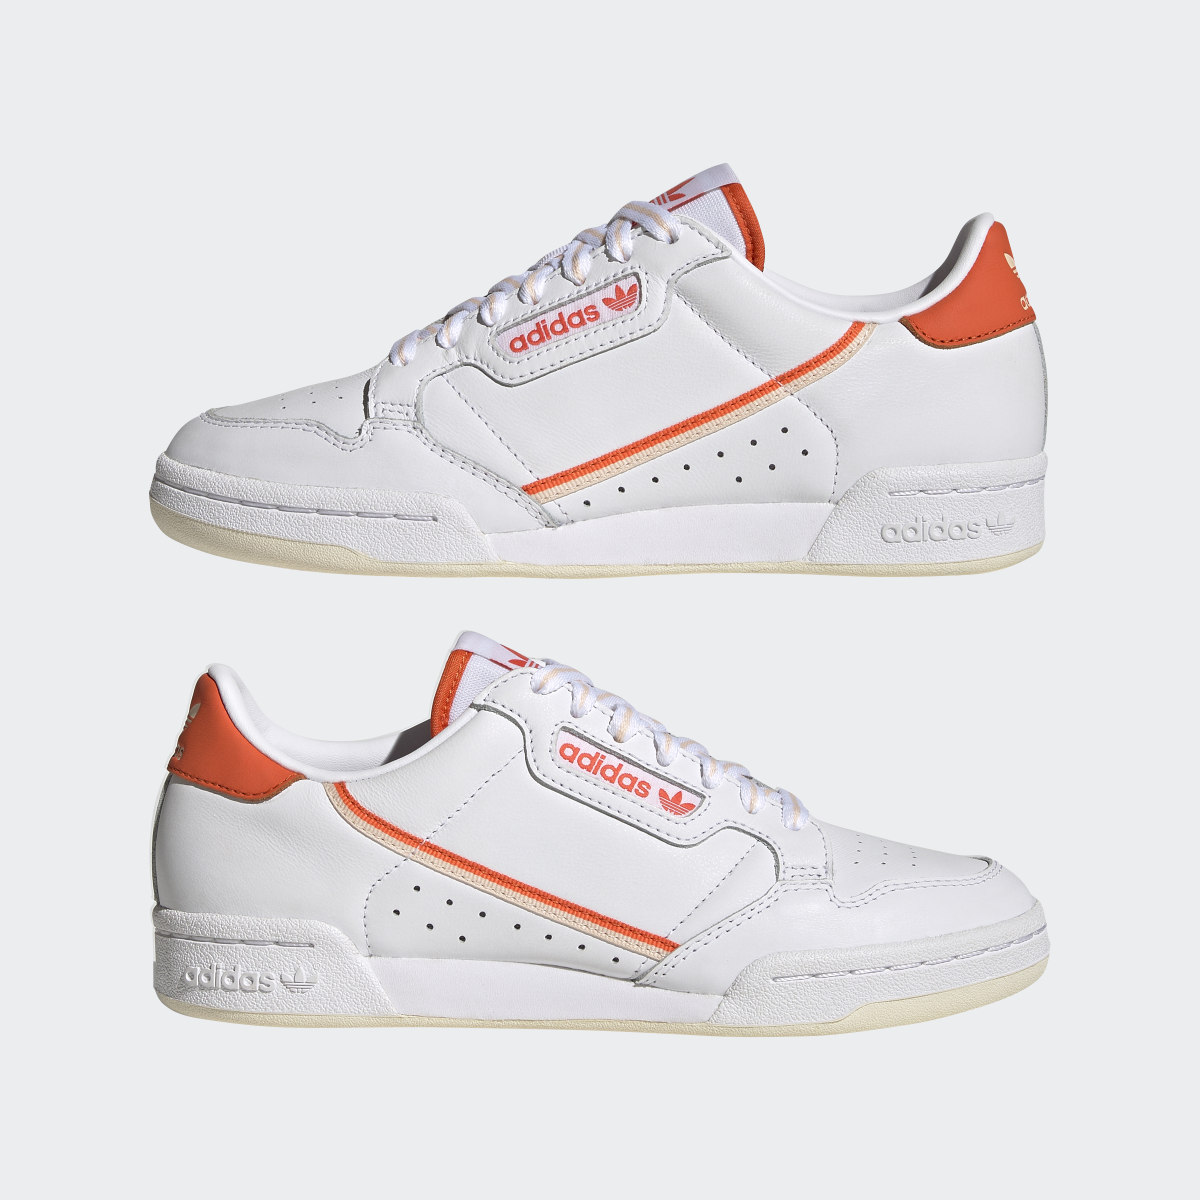 Adidas Continental 80 Shoes. 8